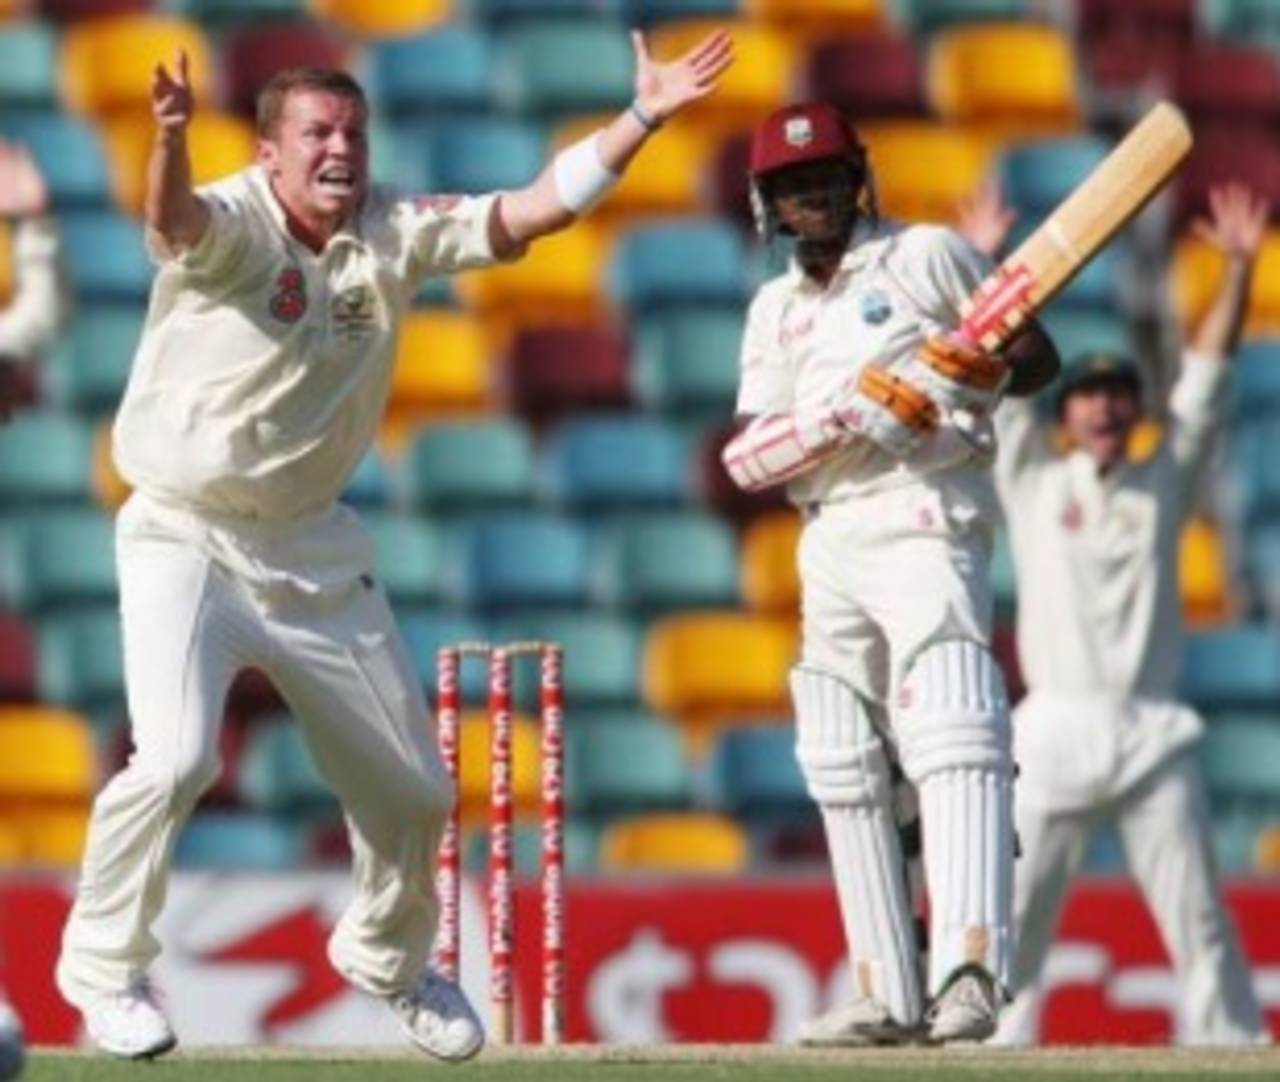 Peter Siddle appeals successfully for the key wicket of Shivnarine Chanderpaul, Australia v West Indies, 1st Test, Brisbane, 2nd day, November 27, 2009